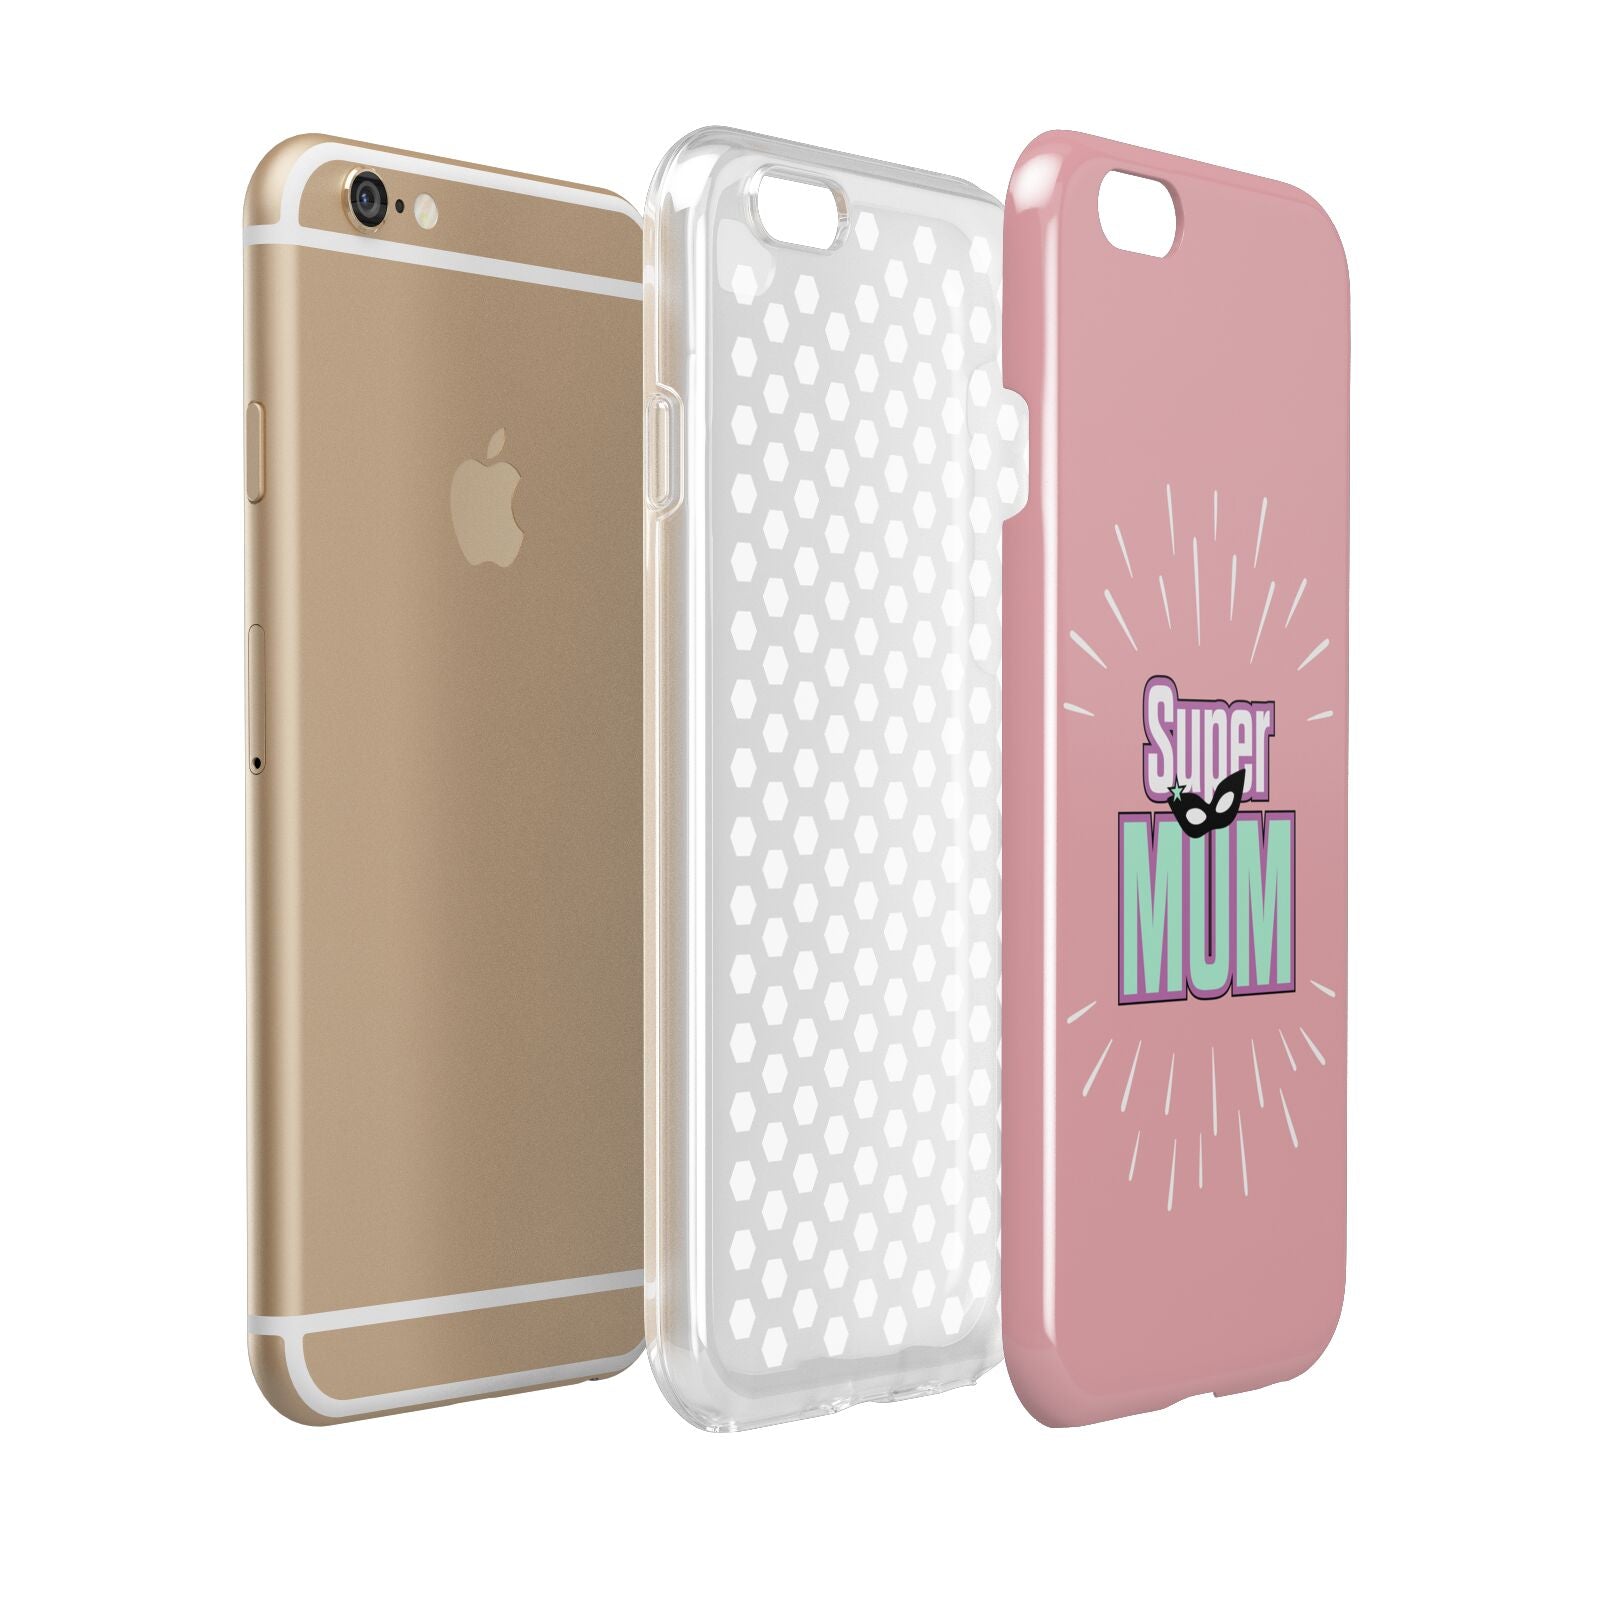 Super Mum Mothers Day Apple iPhone 6 3D Tough Case Expanded view